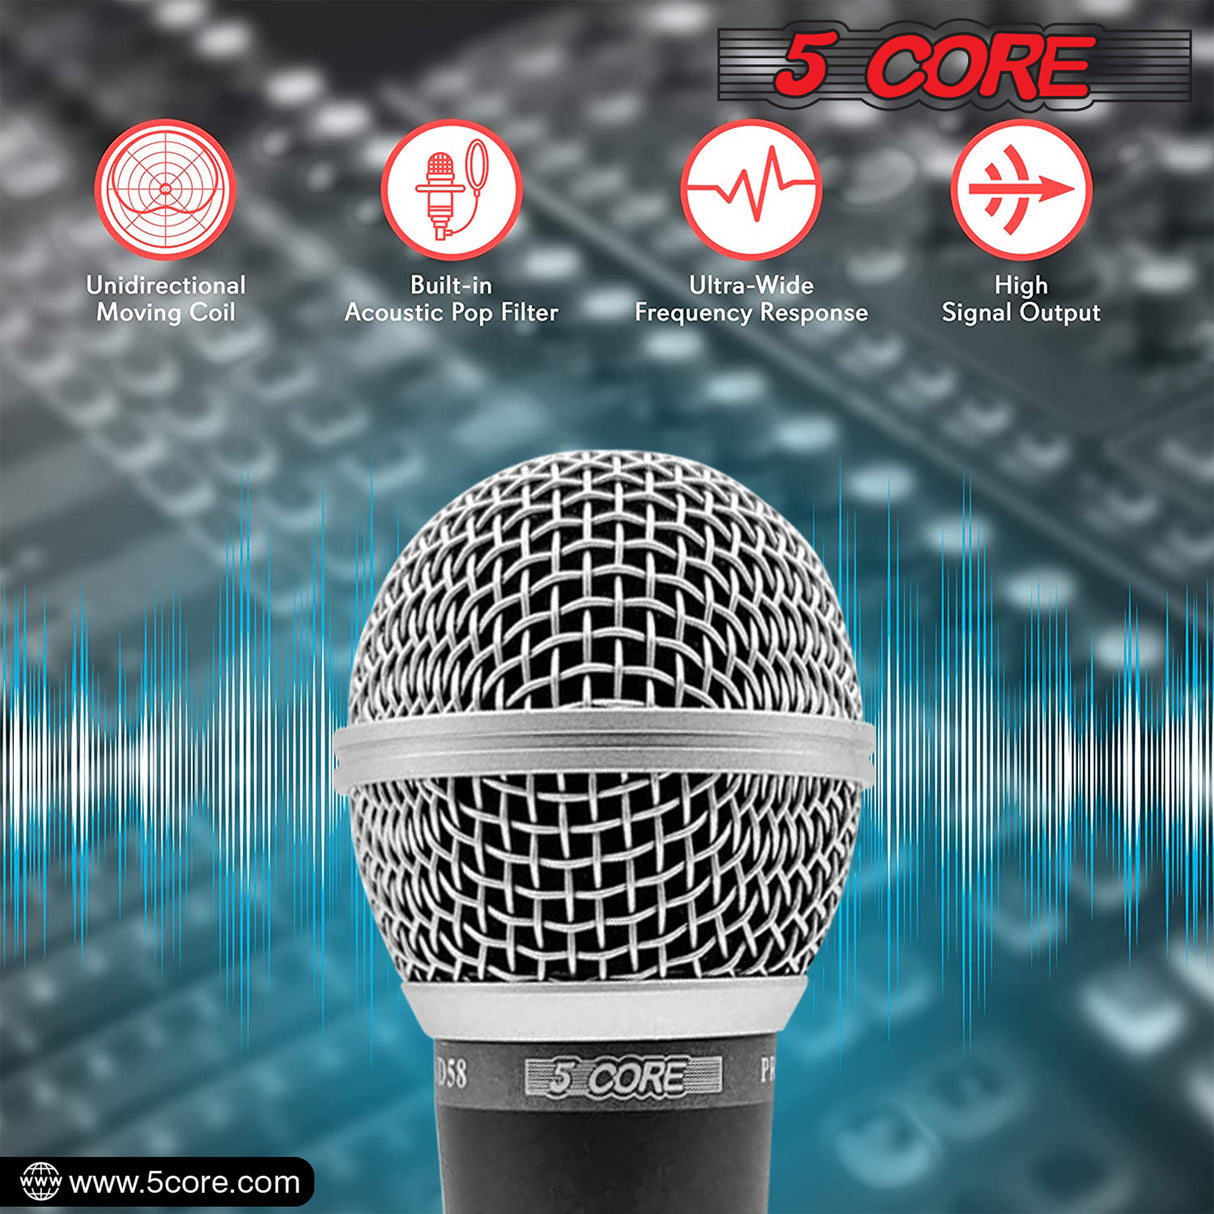 5 CORE Premium Vocal Dynamic Cardioid Handheld Microphone Neodymium Magnet Unidirectional Mic, 16ft Detachable XLR Deluxe Cable to ¼ Audio Jack, Mic Clip, On/Off Switch for Karaoke Singing ND-58